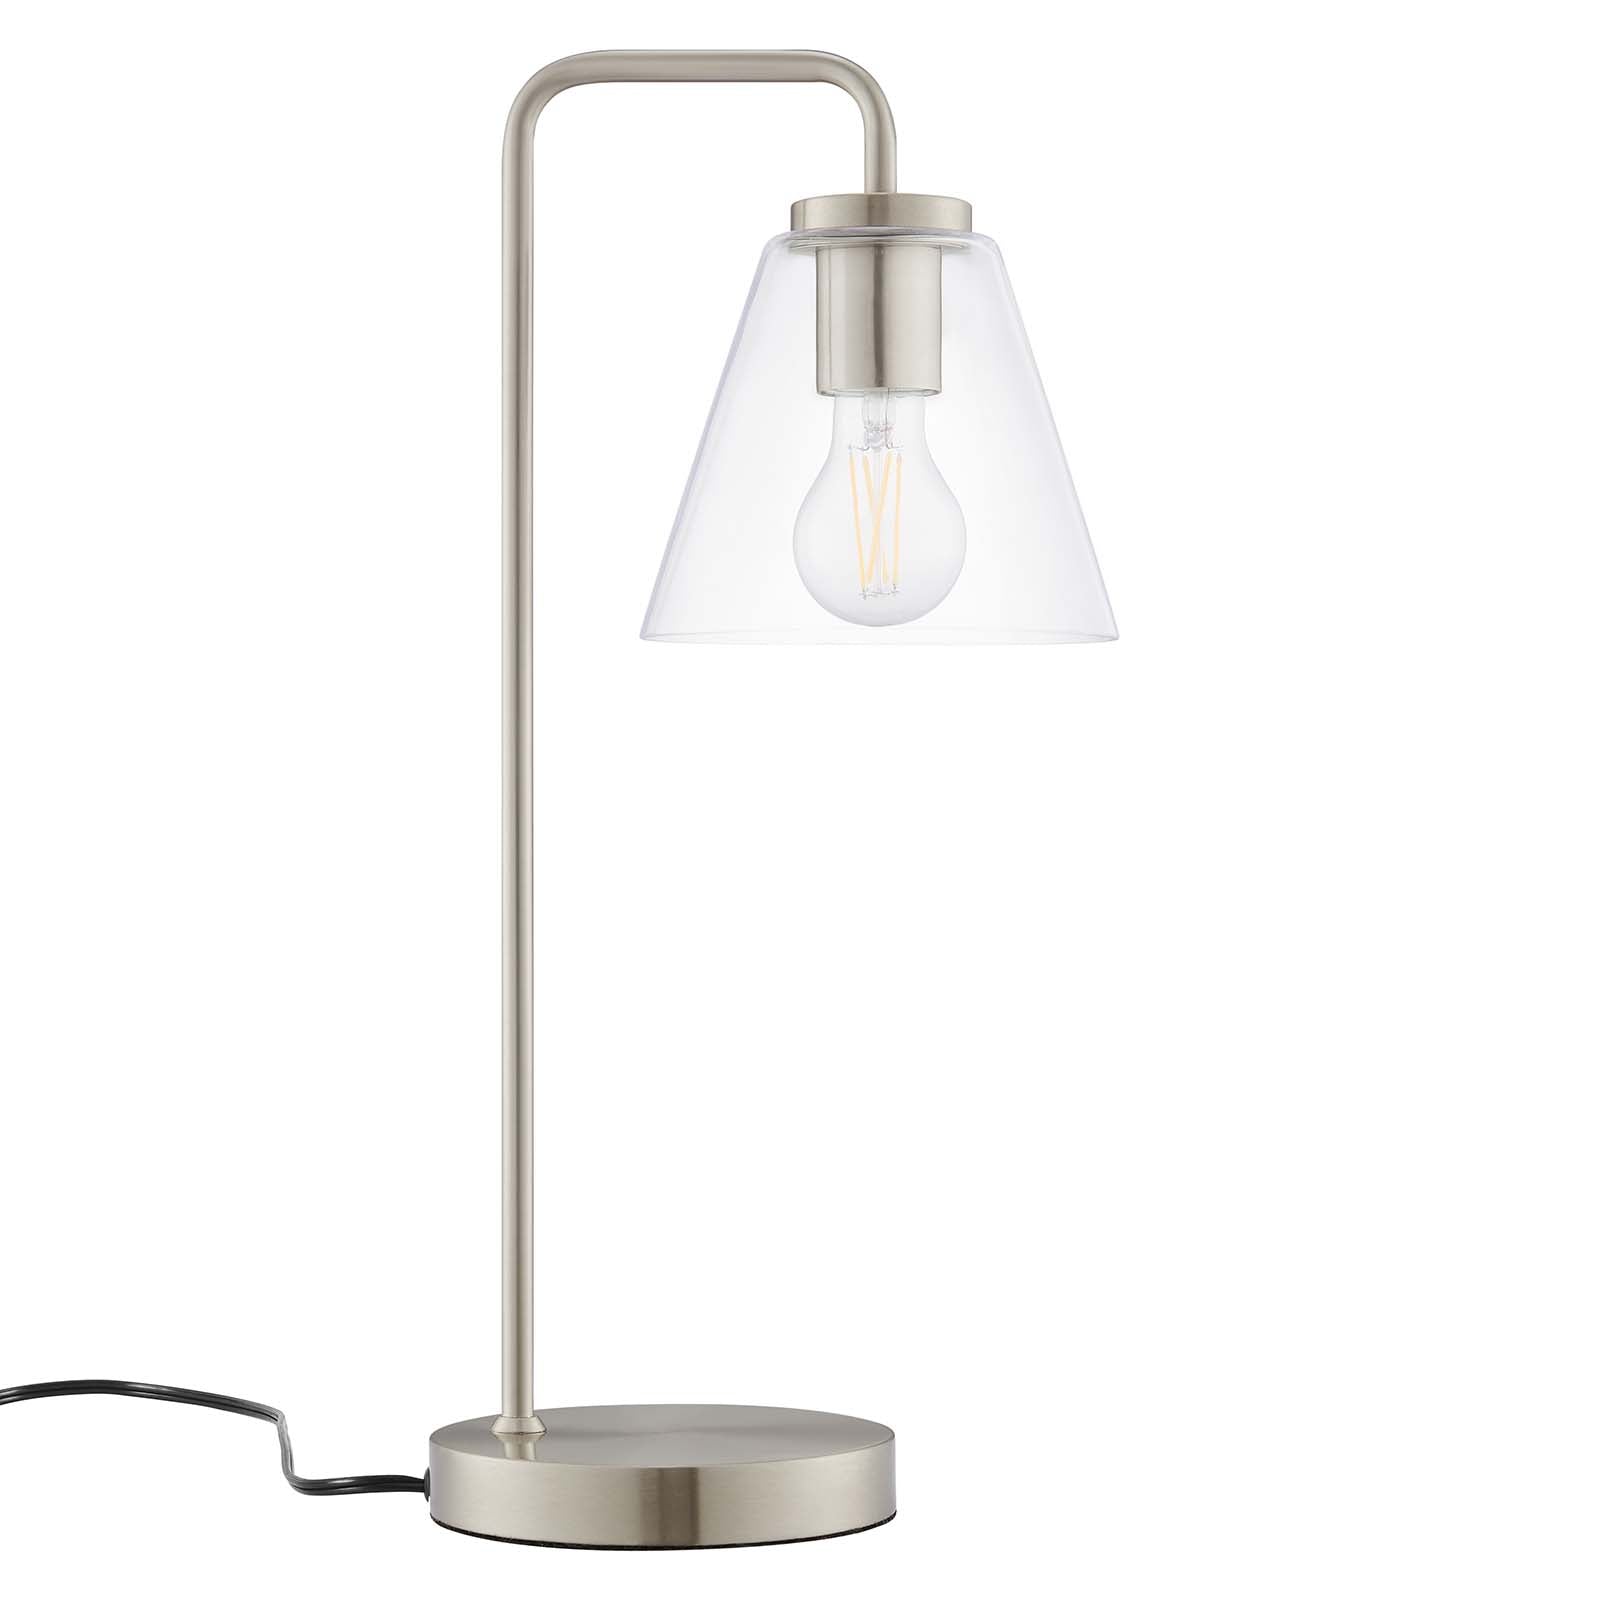 Modway Table Lamps - Element Glass Table Lamp Satin Nickel